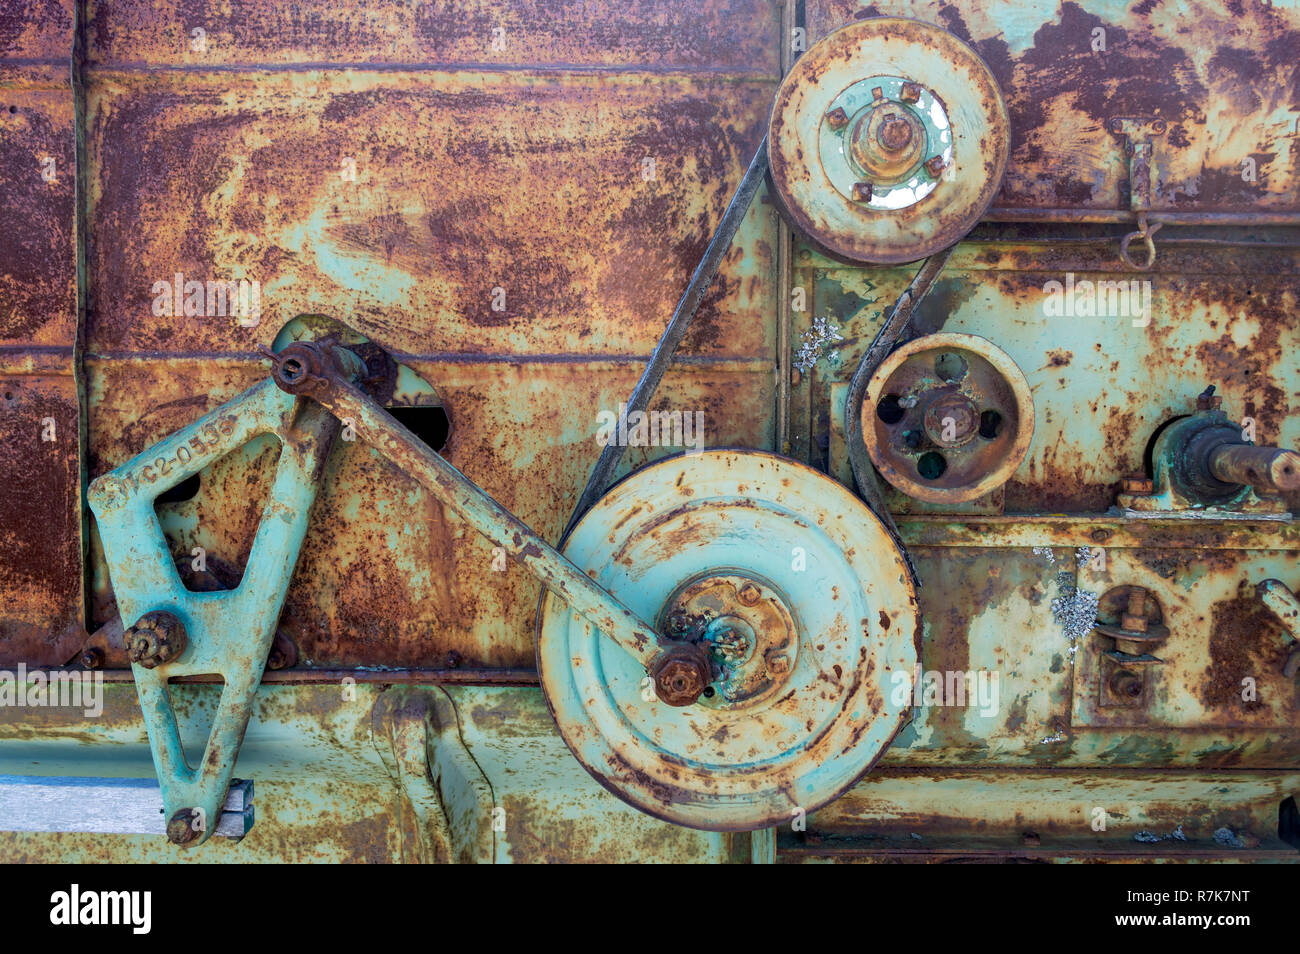 Rusty machine gears, pulleys, and belt Stock Photo